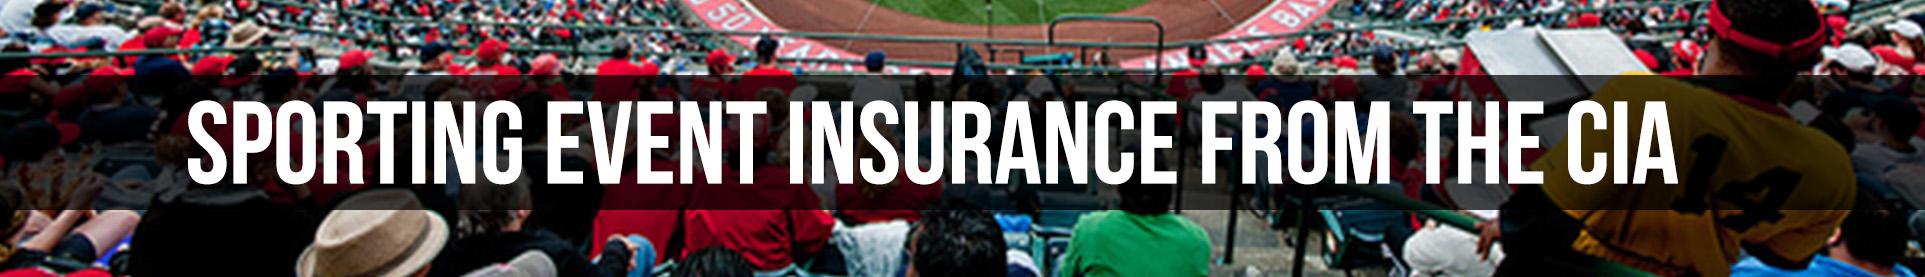 Insurance for Sporting Events from the CIA